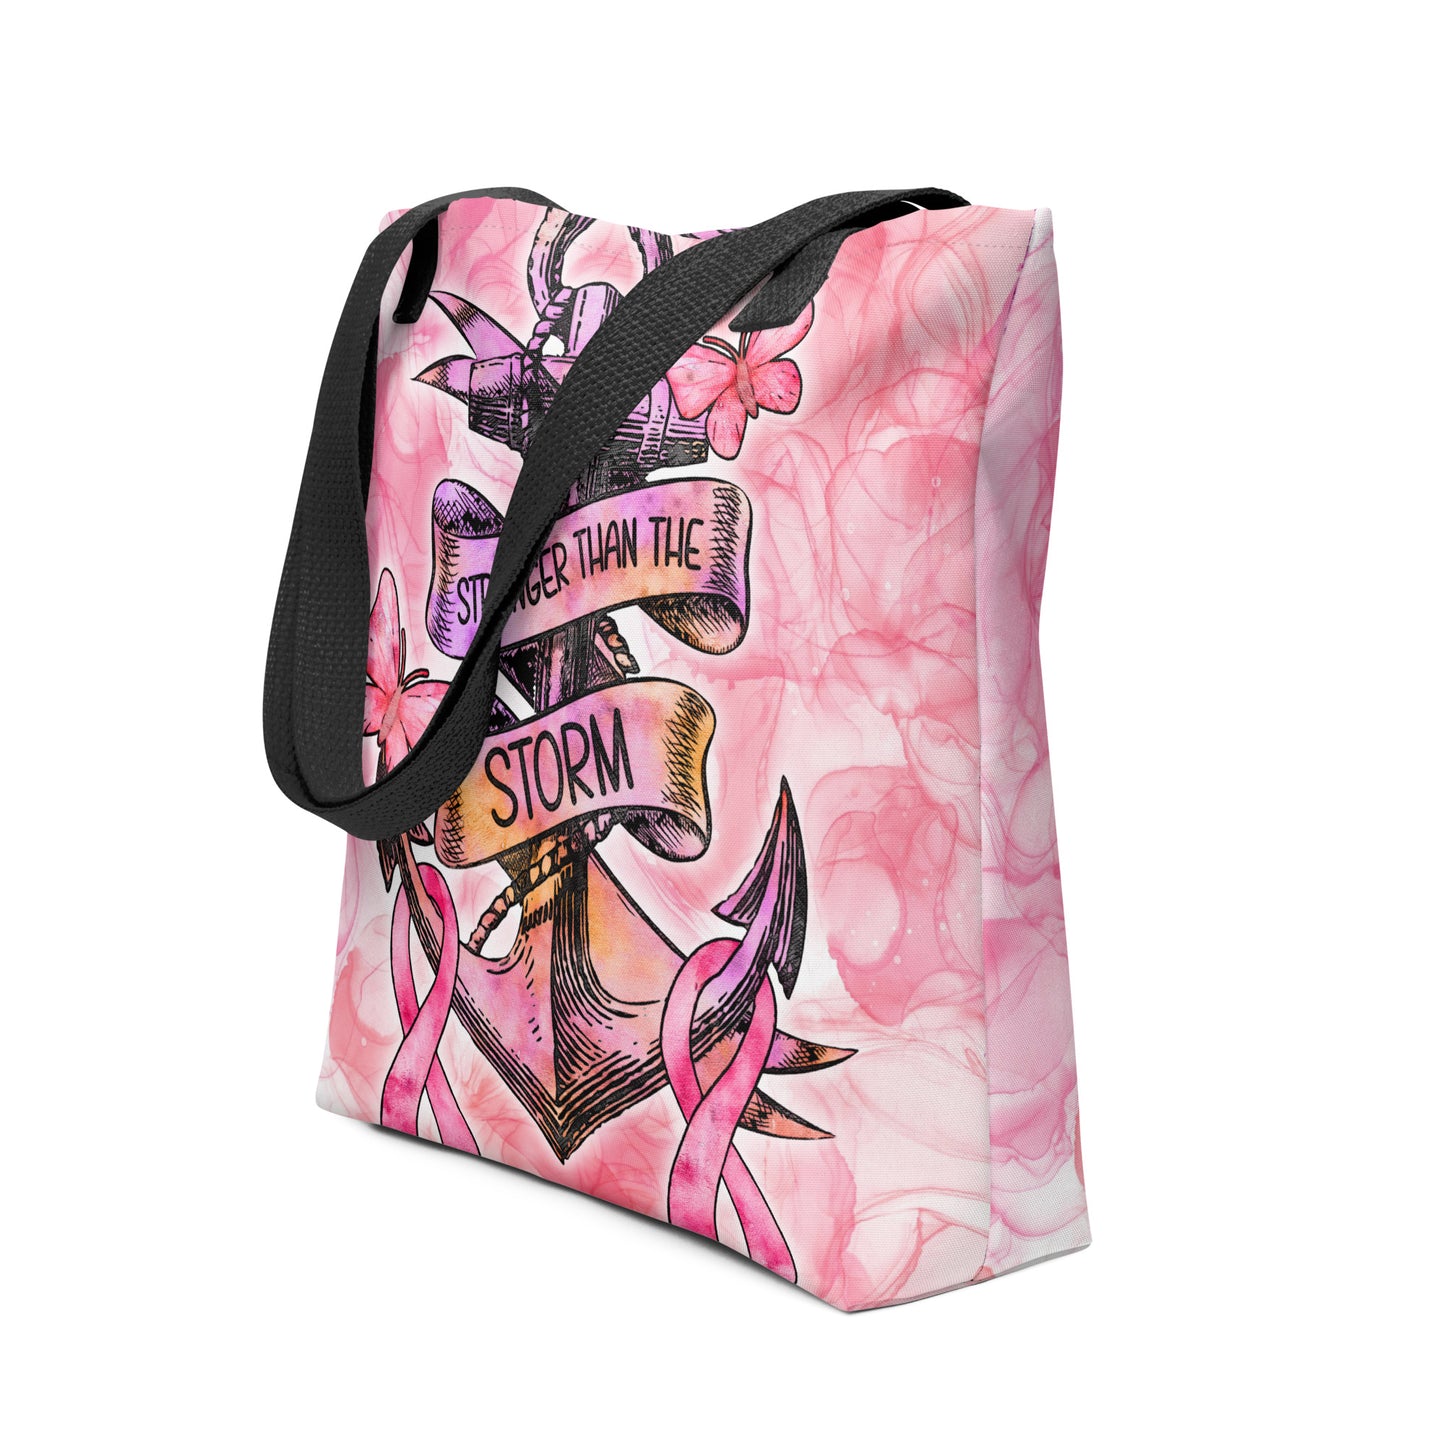 Stronger Than the Storm Breast Cancer Awareness Tote bag CedarHill Country Market